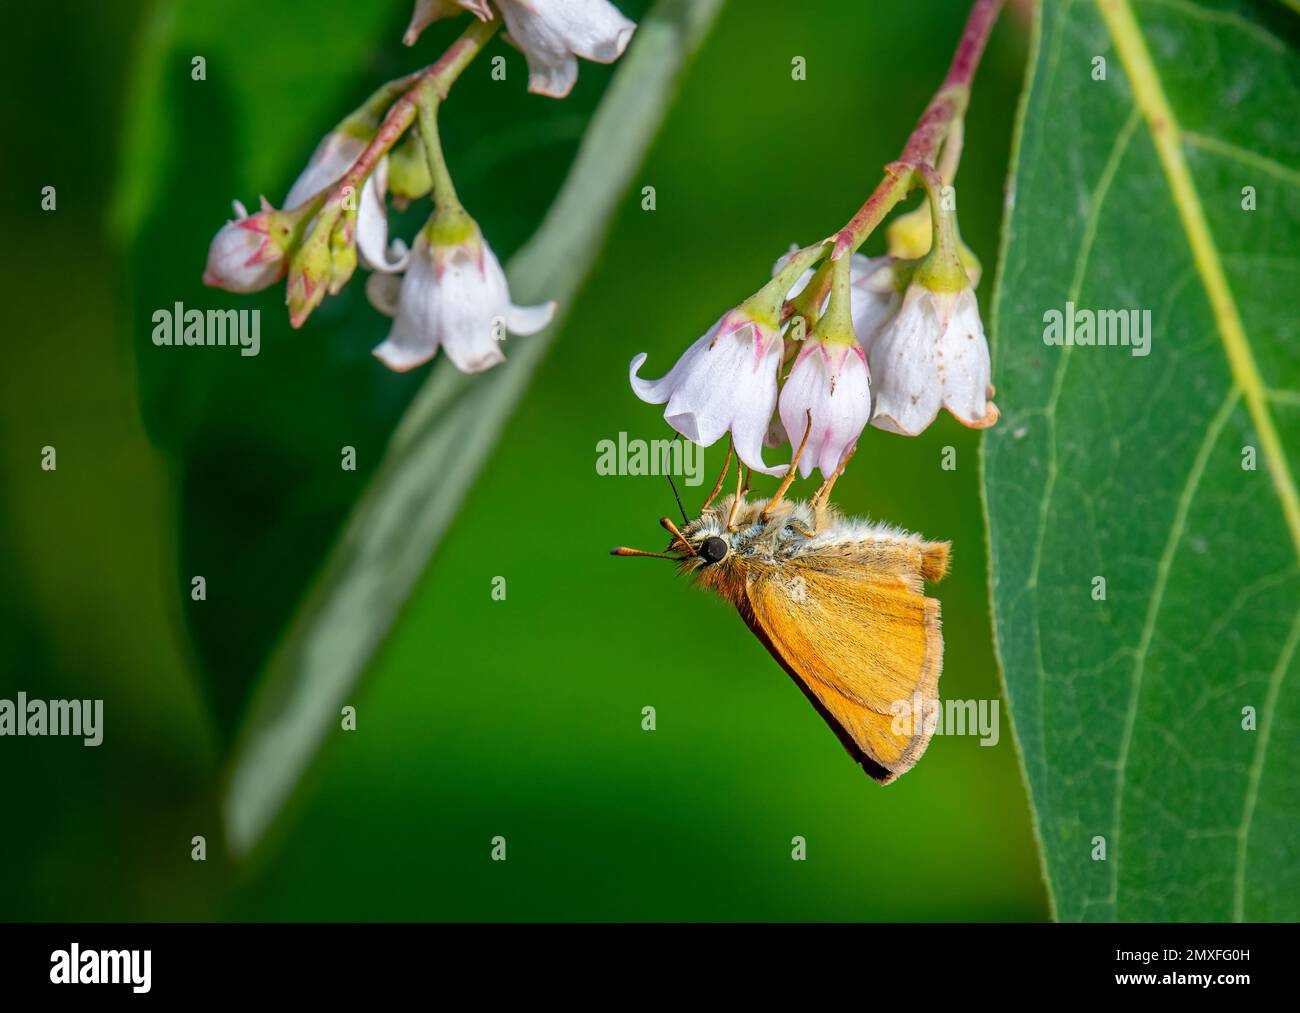 This dainty Least Skipper butterfly was captured nectaring on these beautiful northwoods wildflowers. Stock Photo